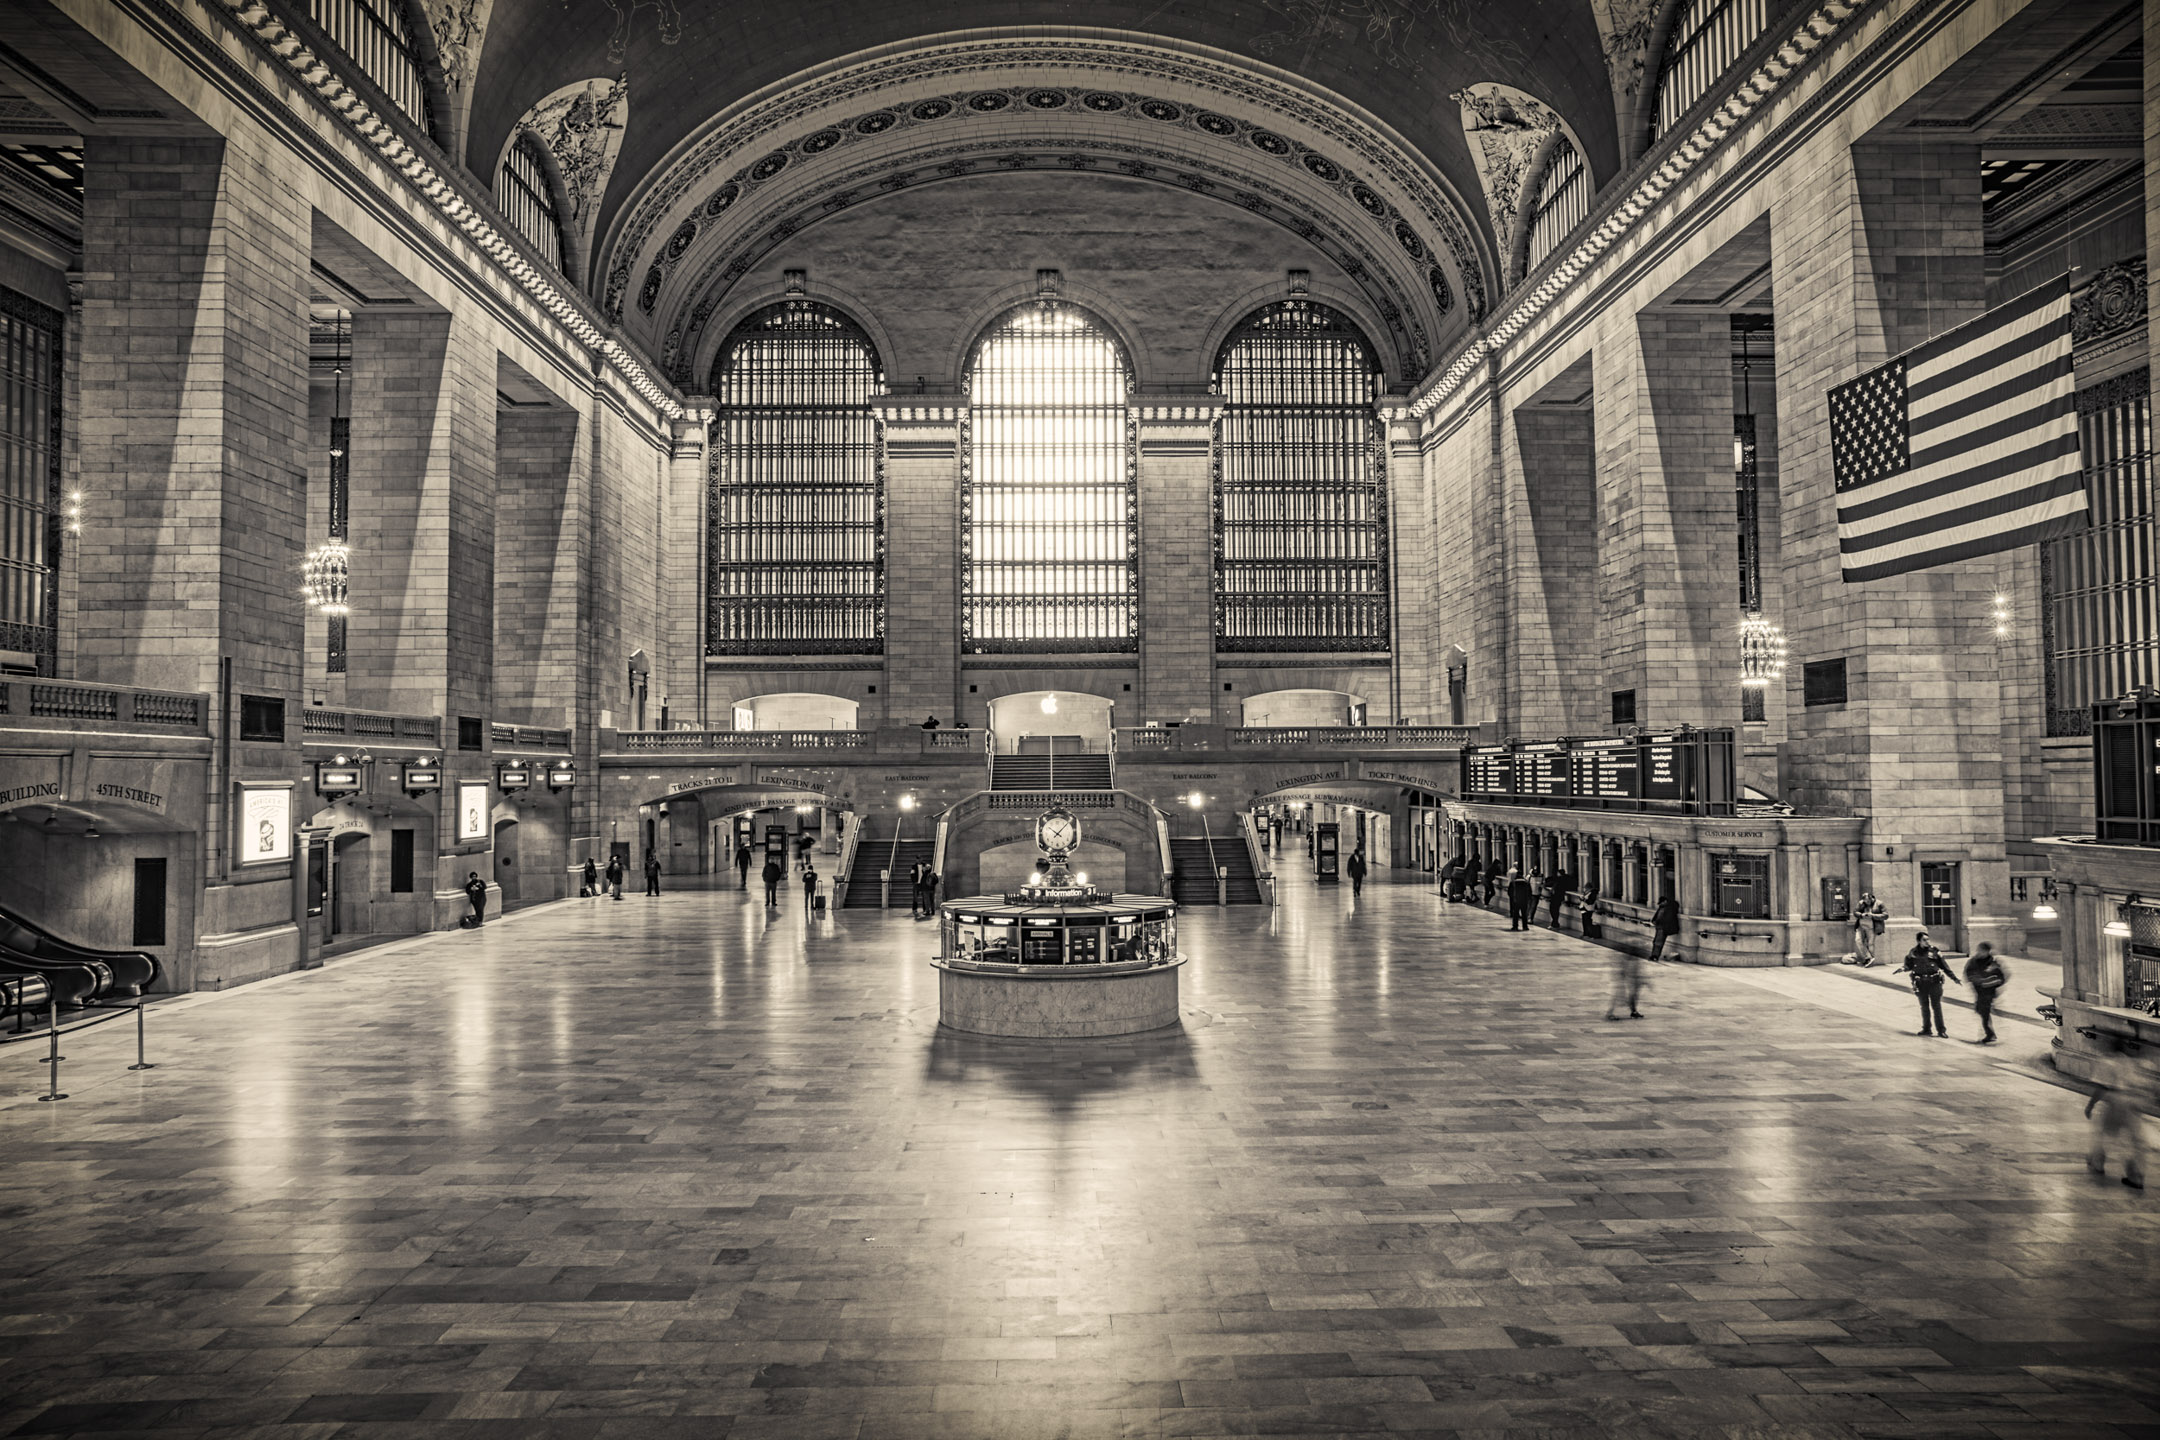 The nearly empty Grand Central Terminal of New York City because of the coronavirus pandemic.